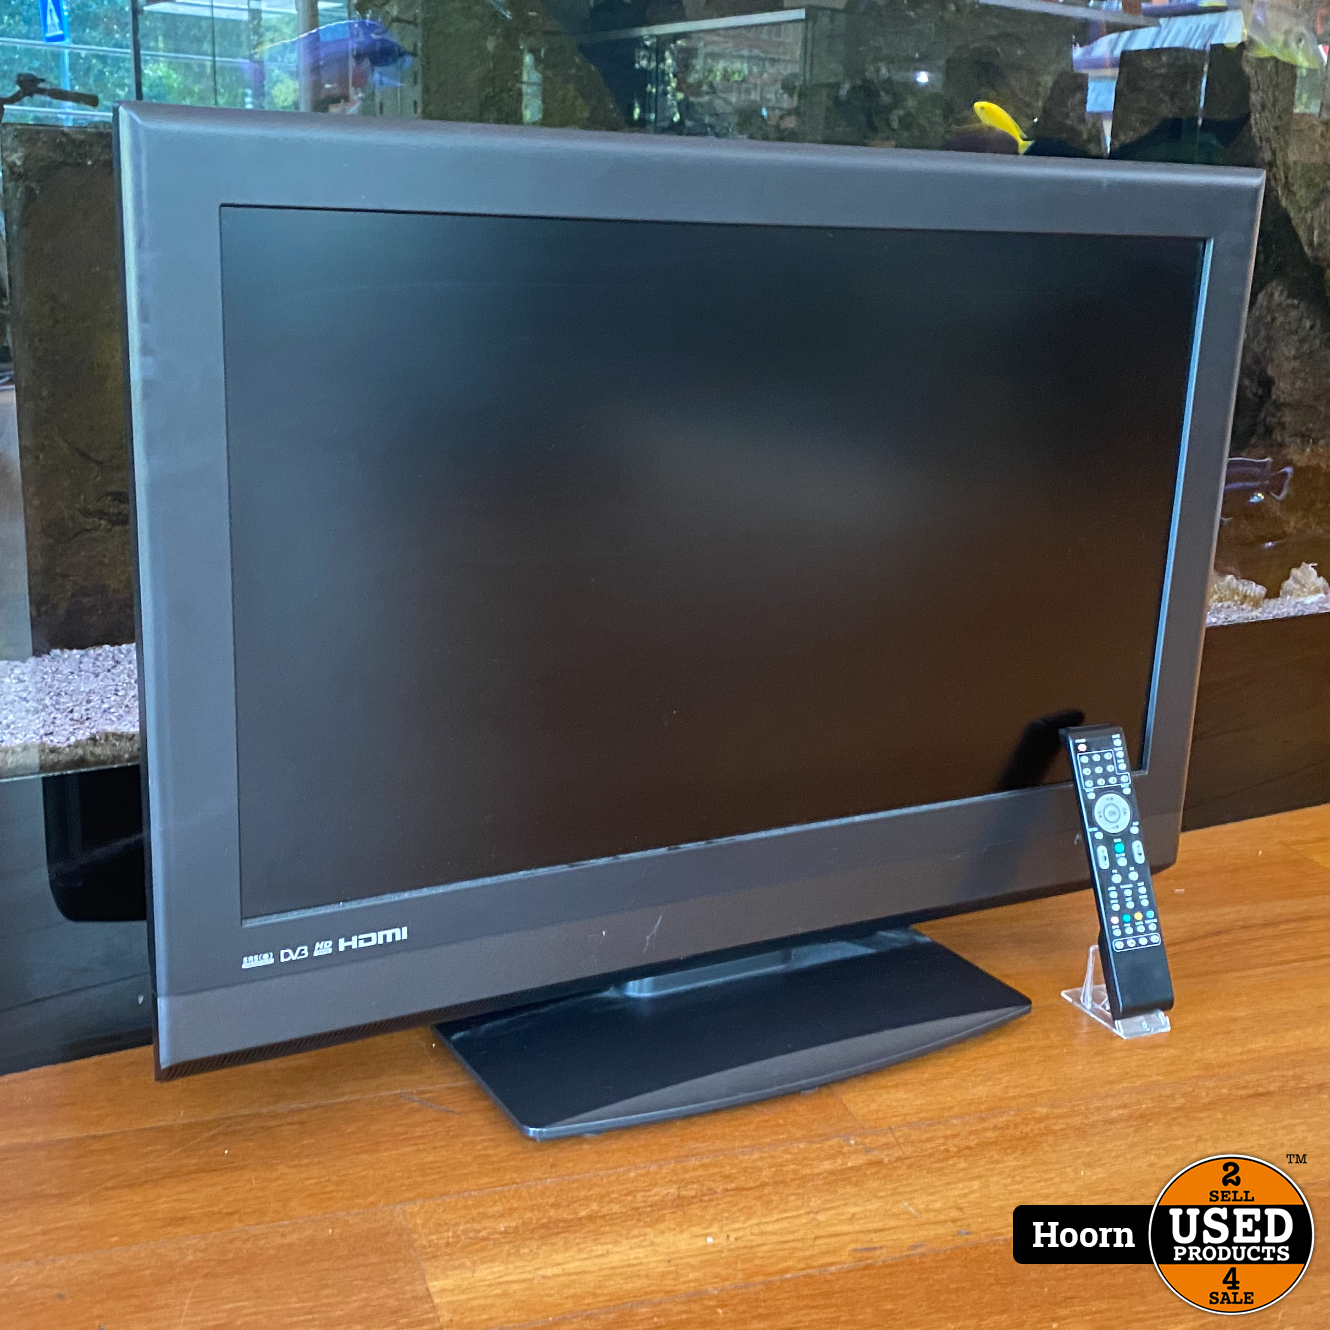 bossen Productie pion Xyno 32ECO81 32 inch HD-Ready LCD TV incl. Afstandsbediening - Used  Products Hoorn